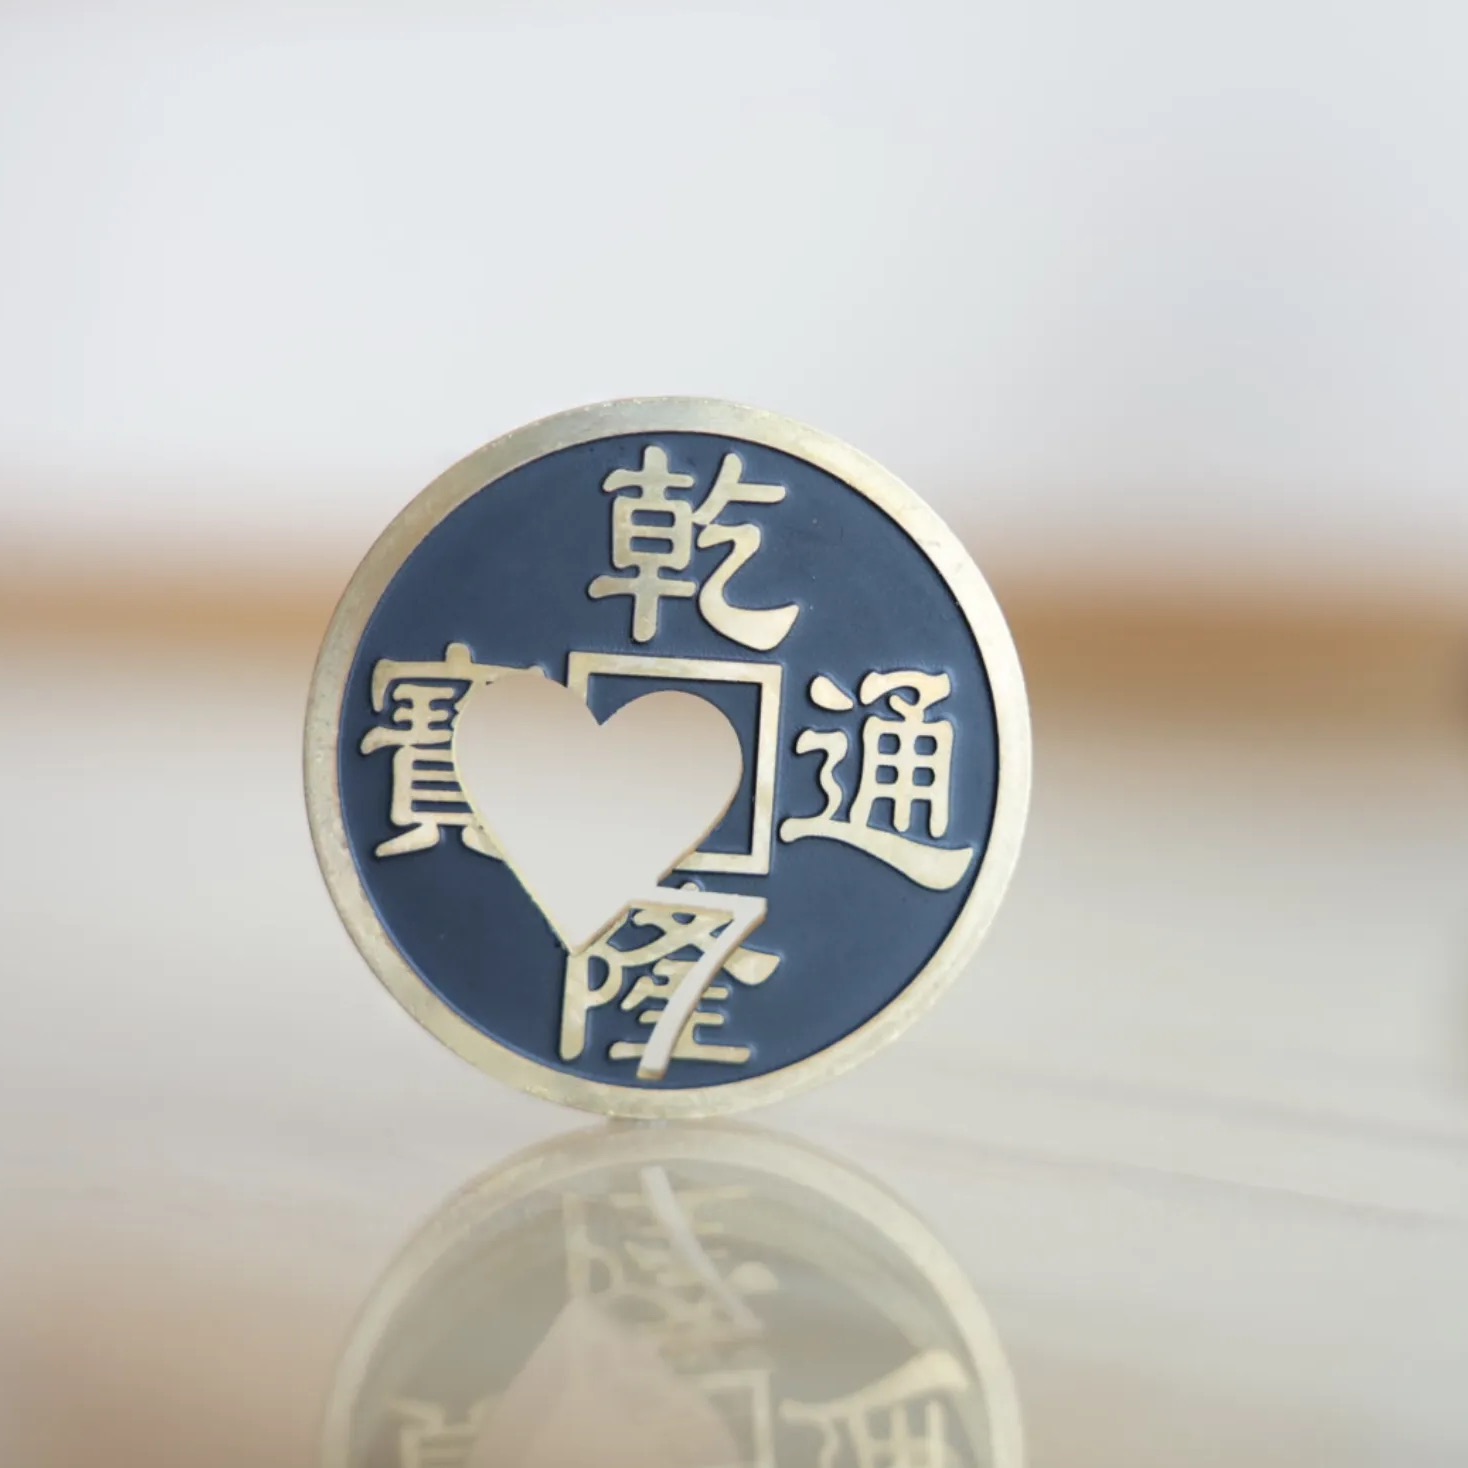 Chinese coin with Prediction by N2G